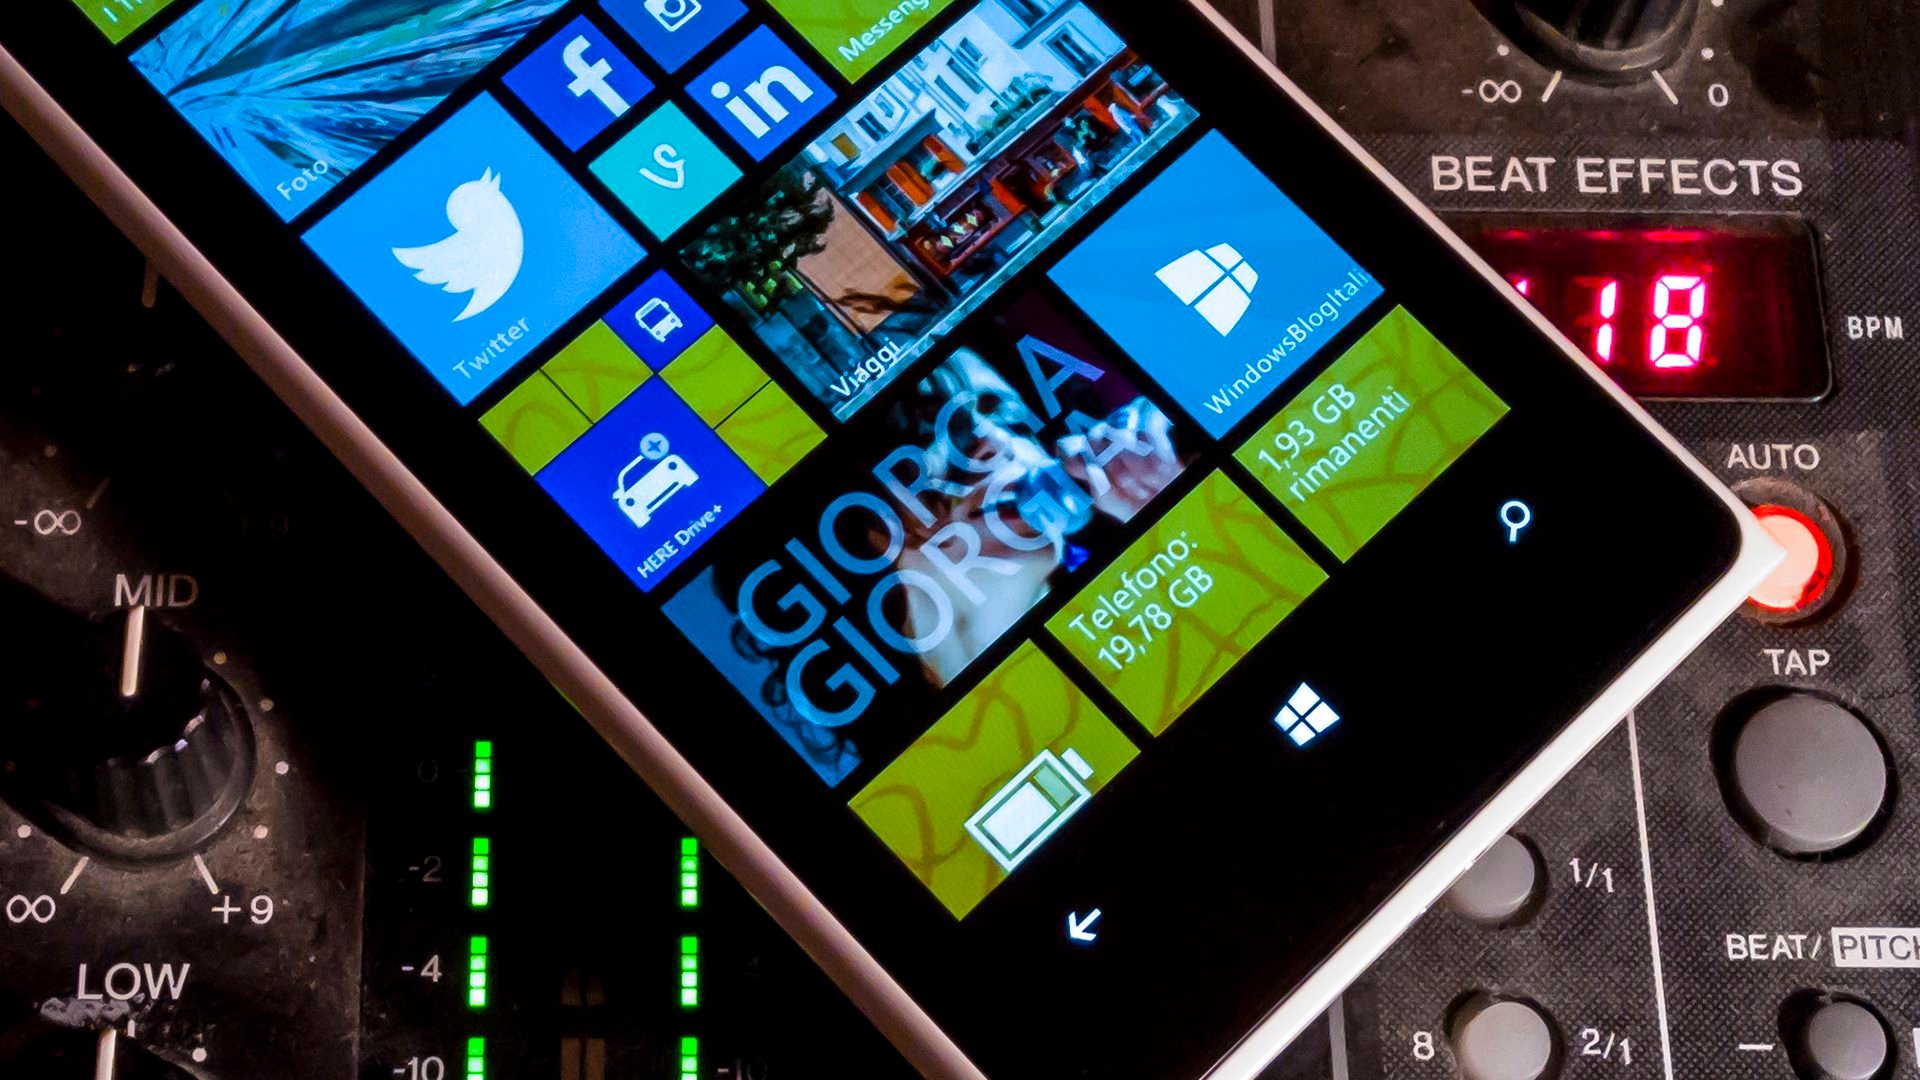 The best and worst Windows Phone apps of 2014.